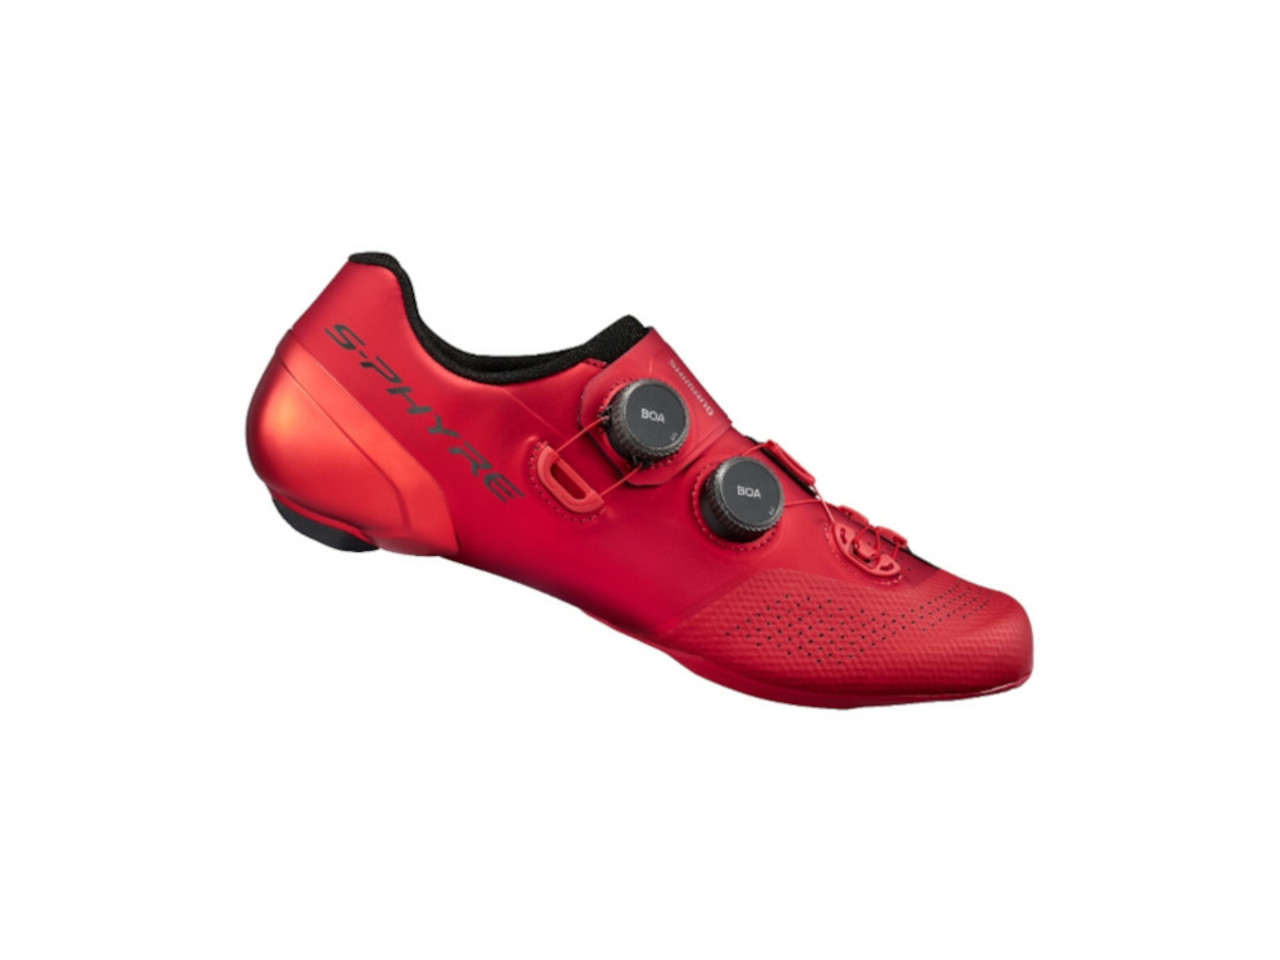 Shimano S-Phyre SH-RC902 Men's Road Cycling Shoes CLOSEOUT 